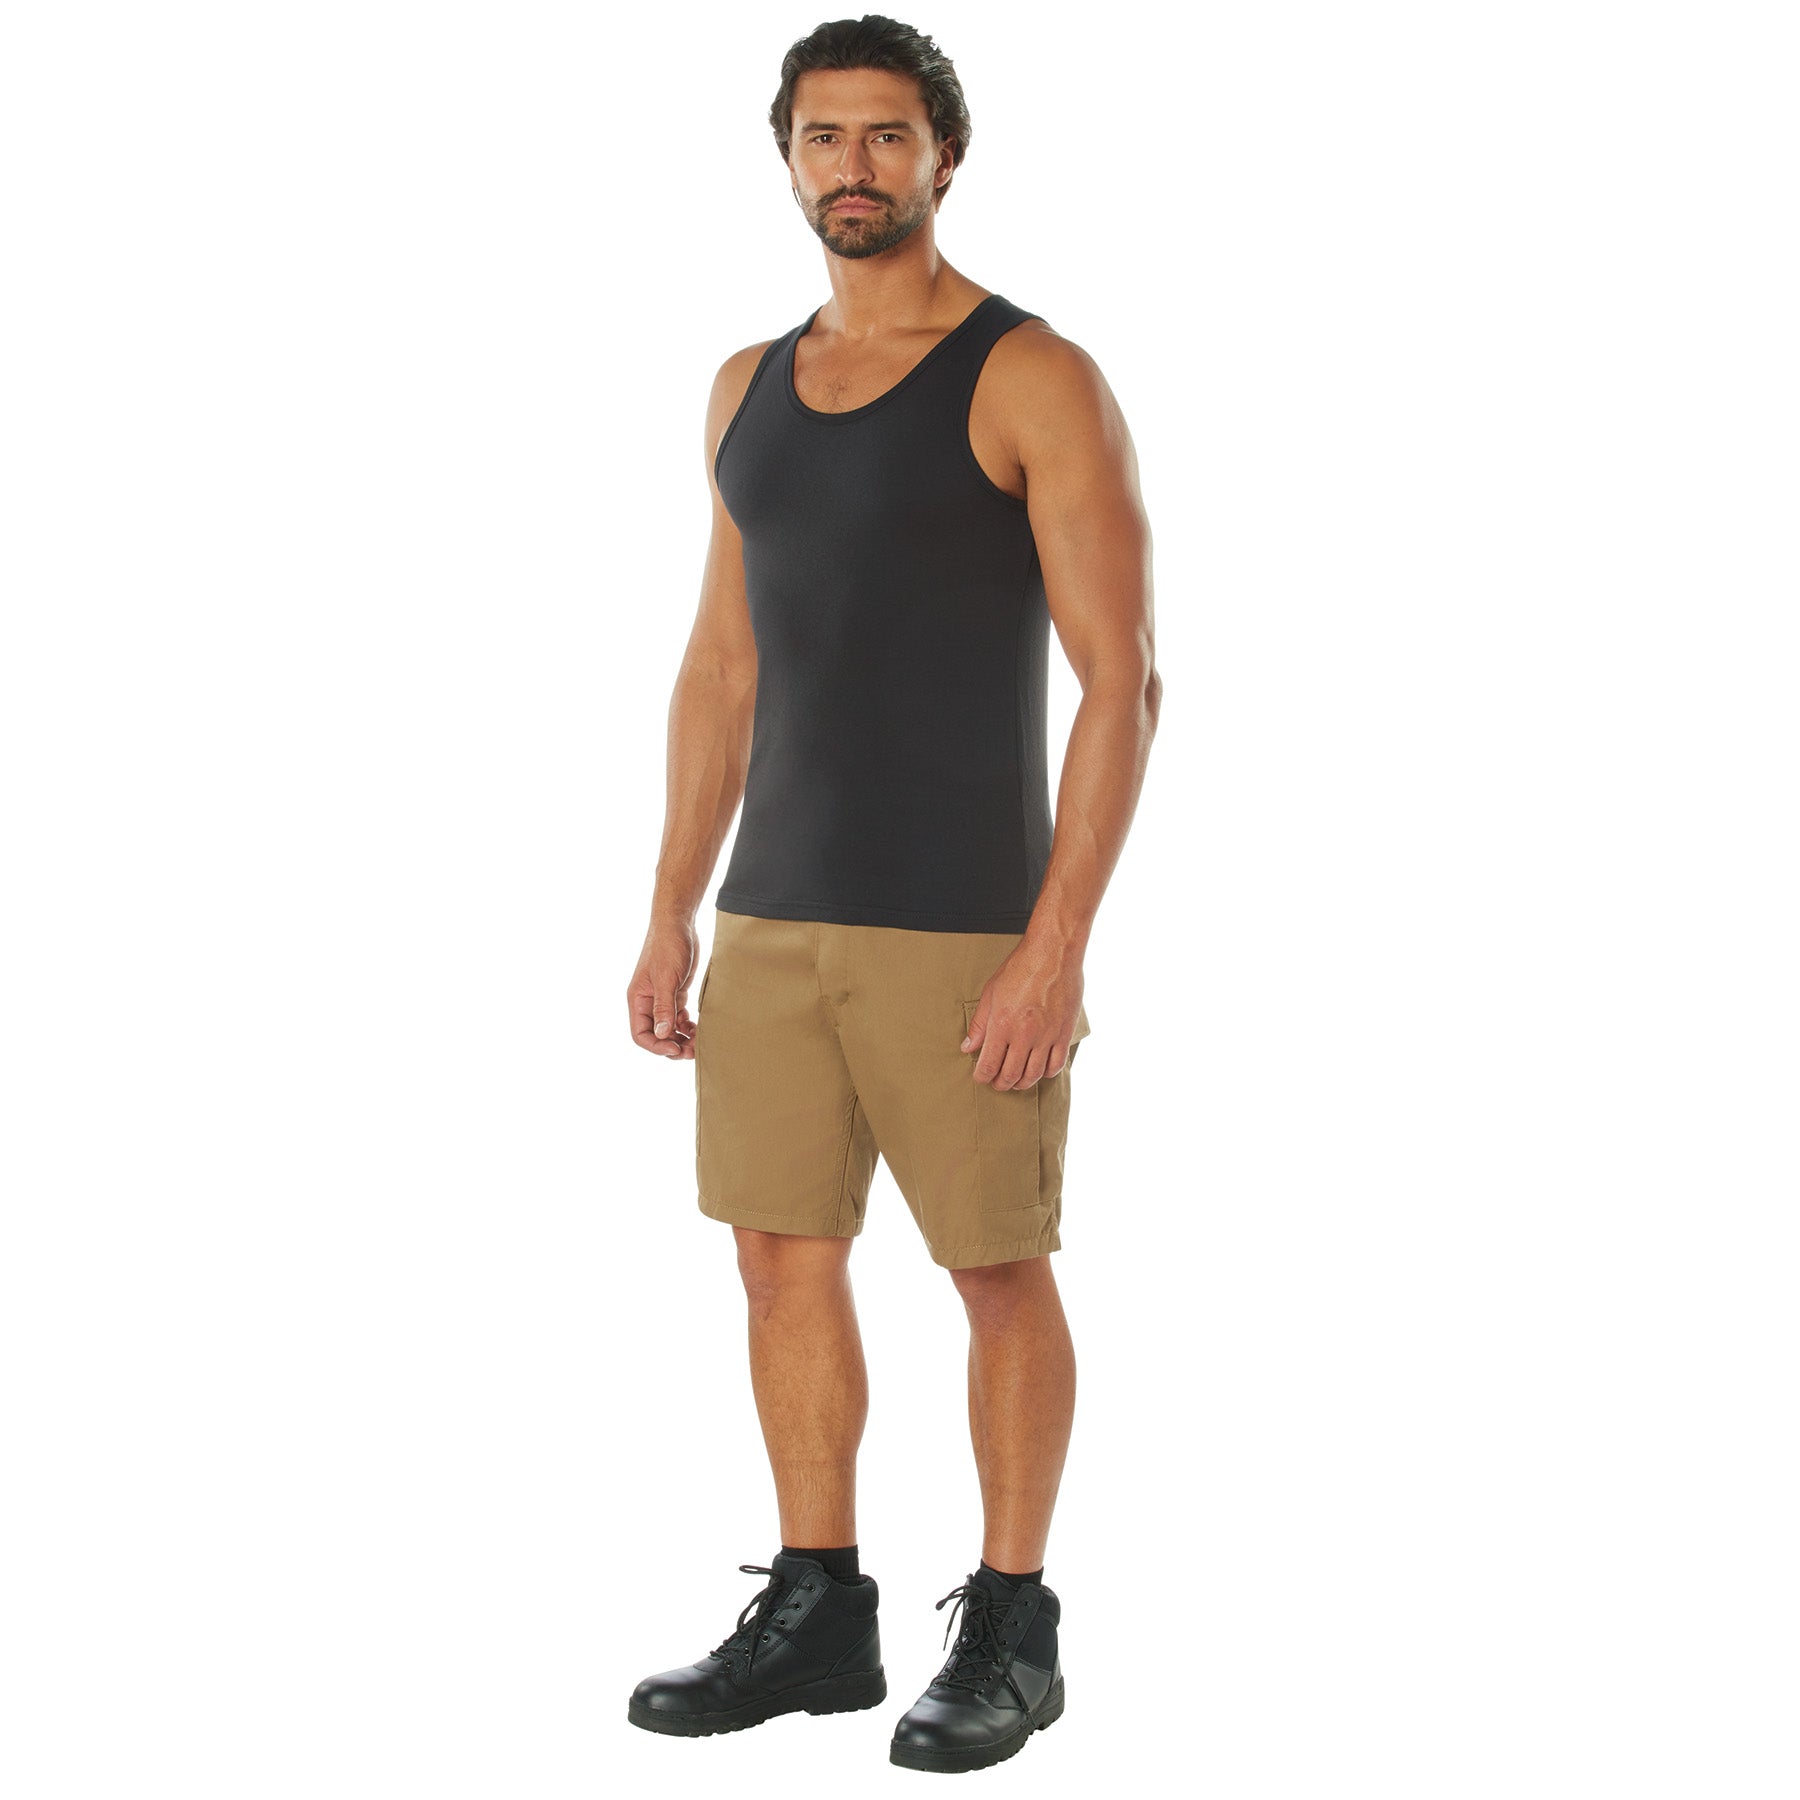 [AR 670-1][Military] Poly/Cotton Tank Tops